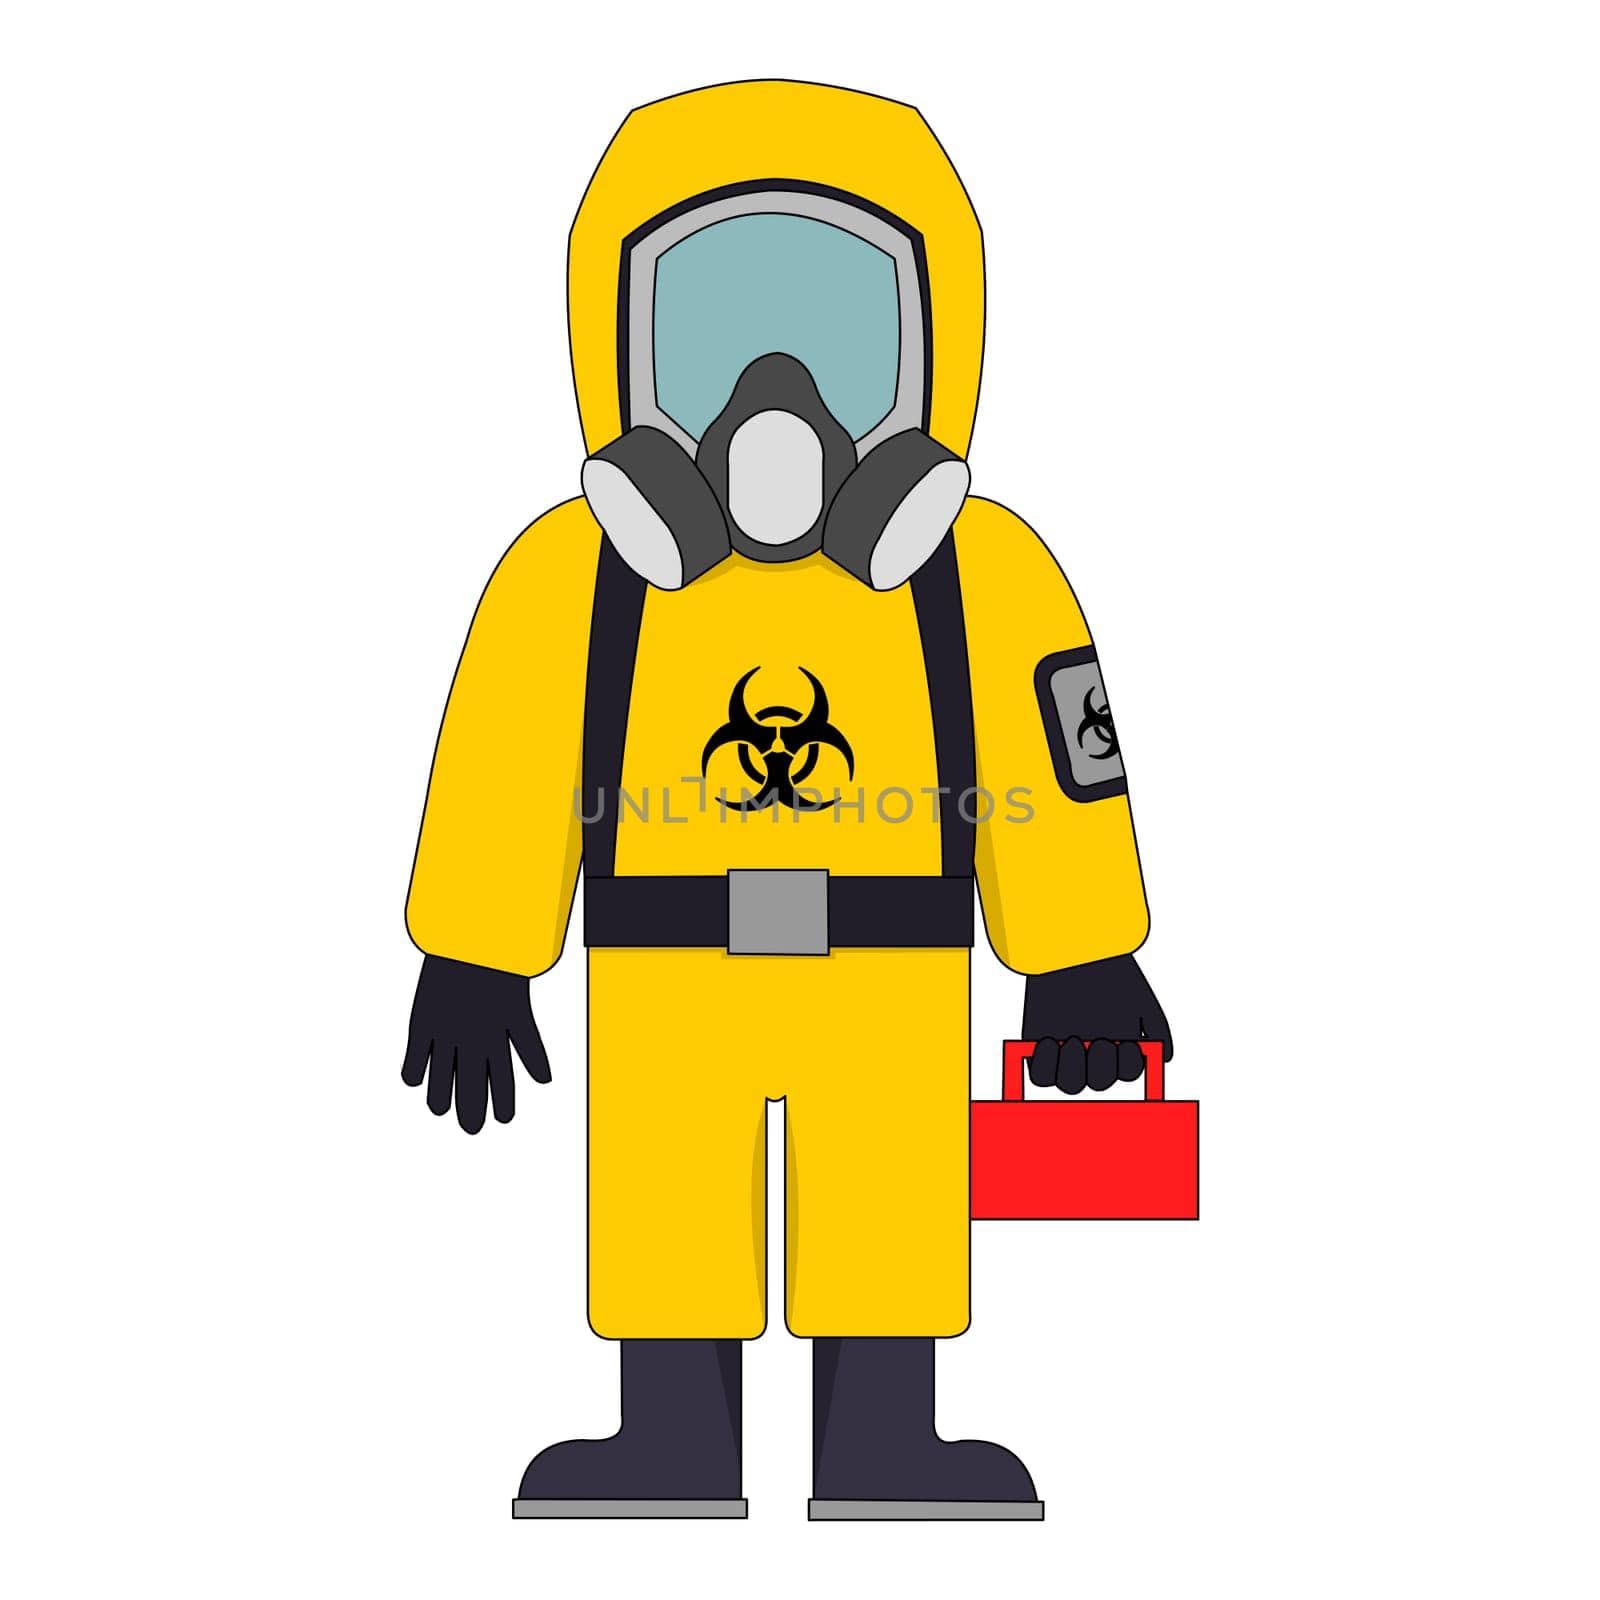 A yellow hazard suit holding a lunch box.